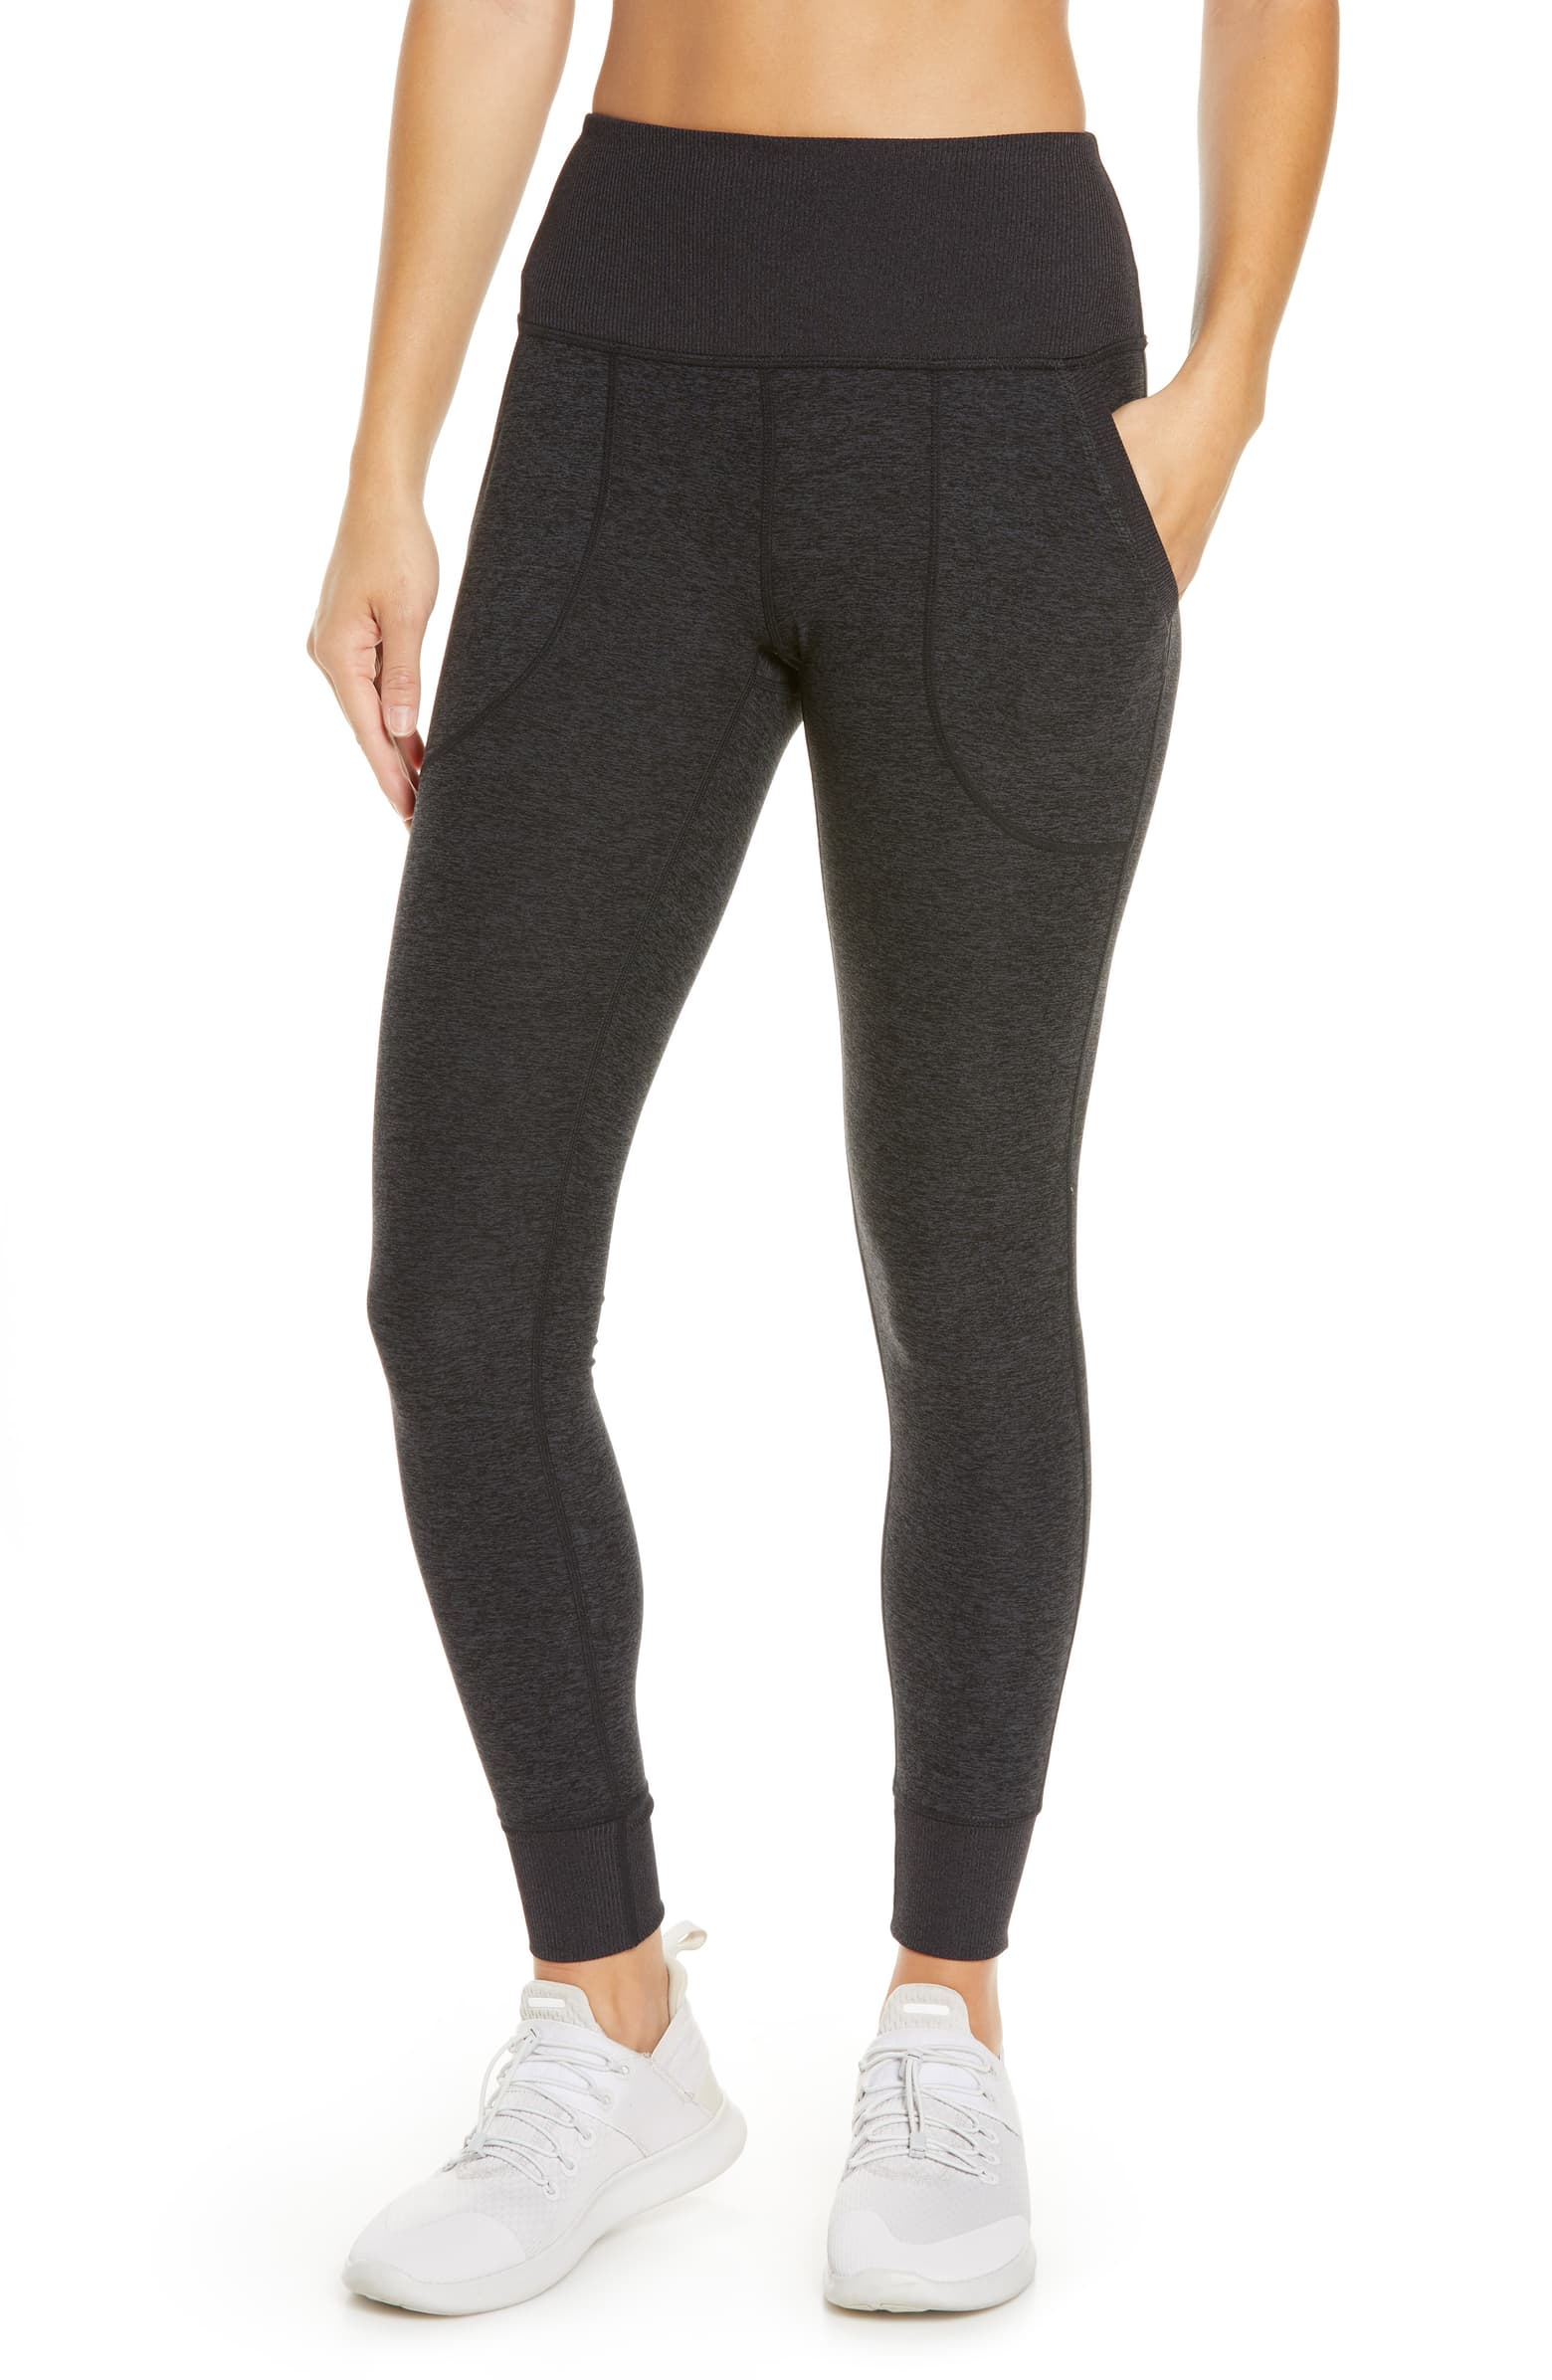 Zella Leggings With Pockets Are Up to 25% Off Right Now